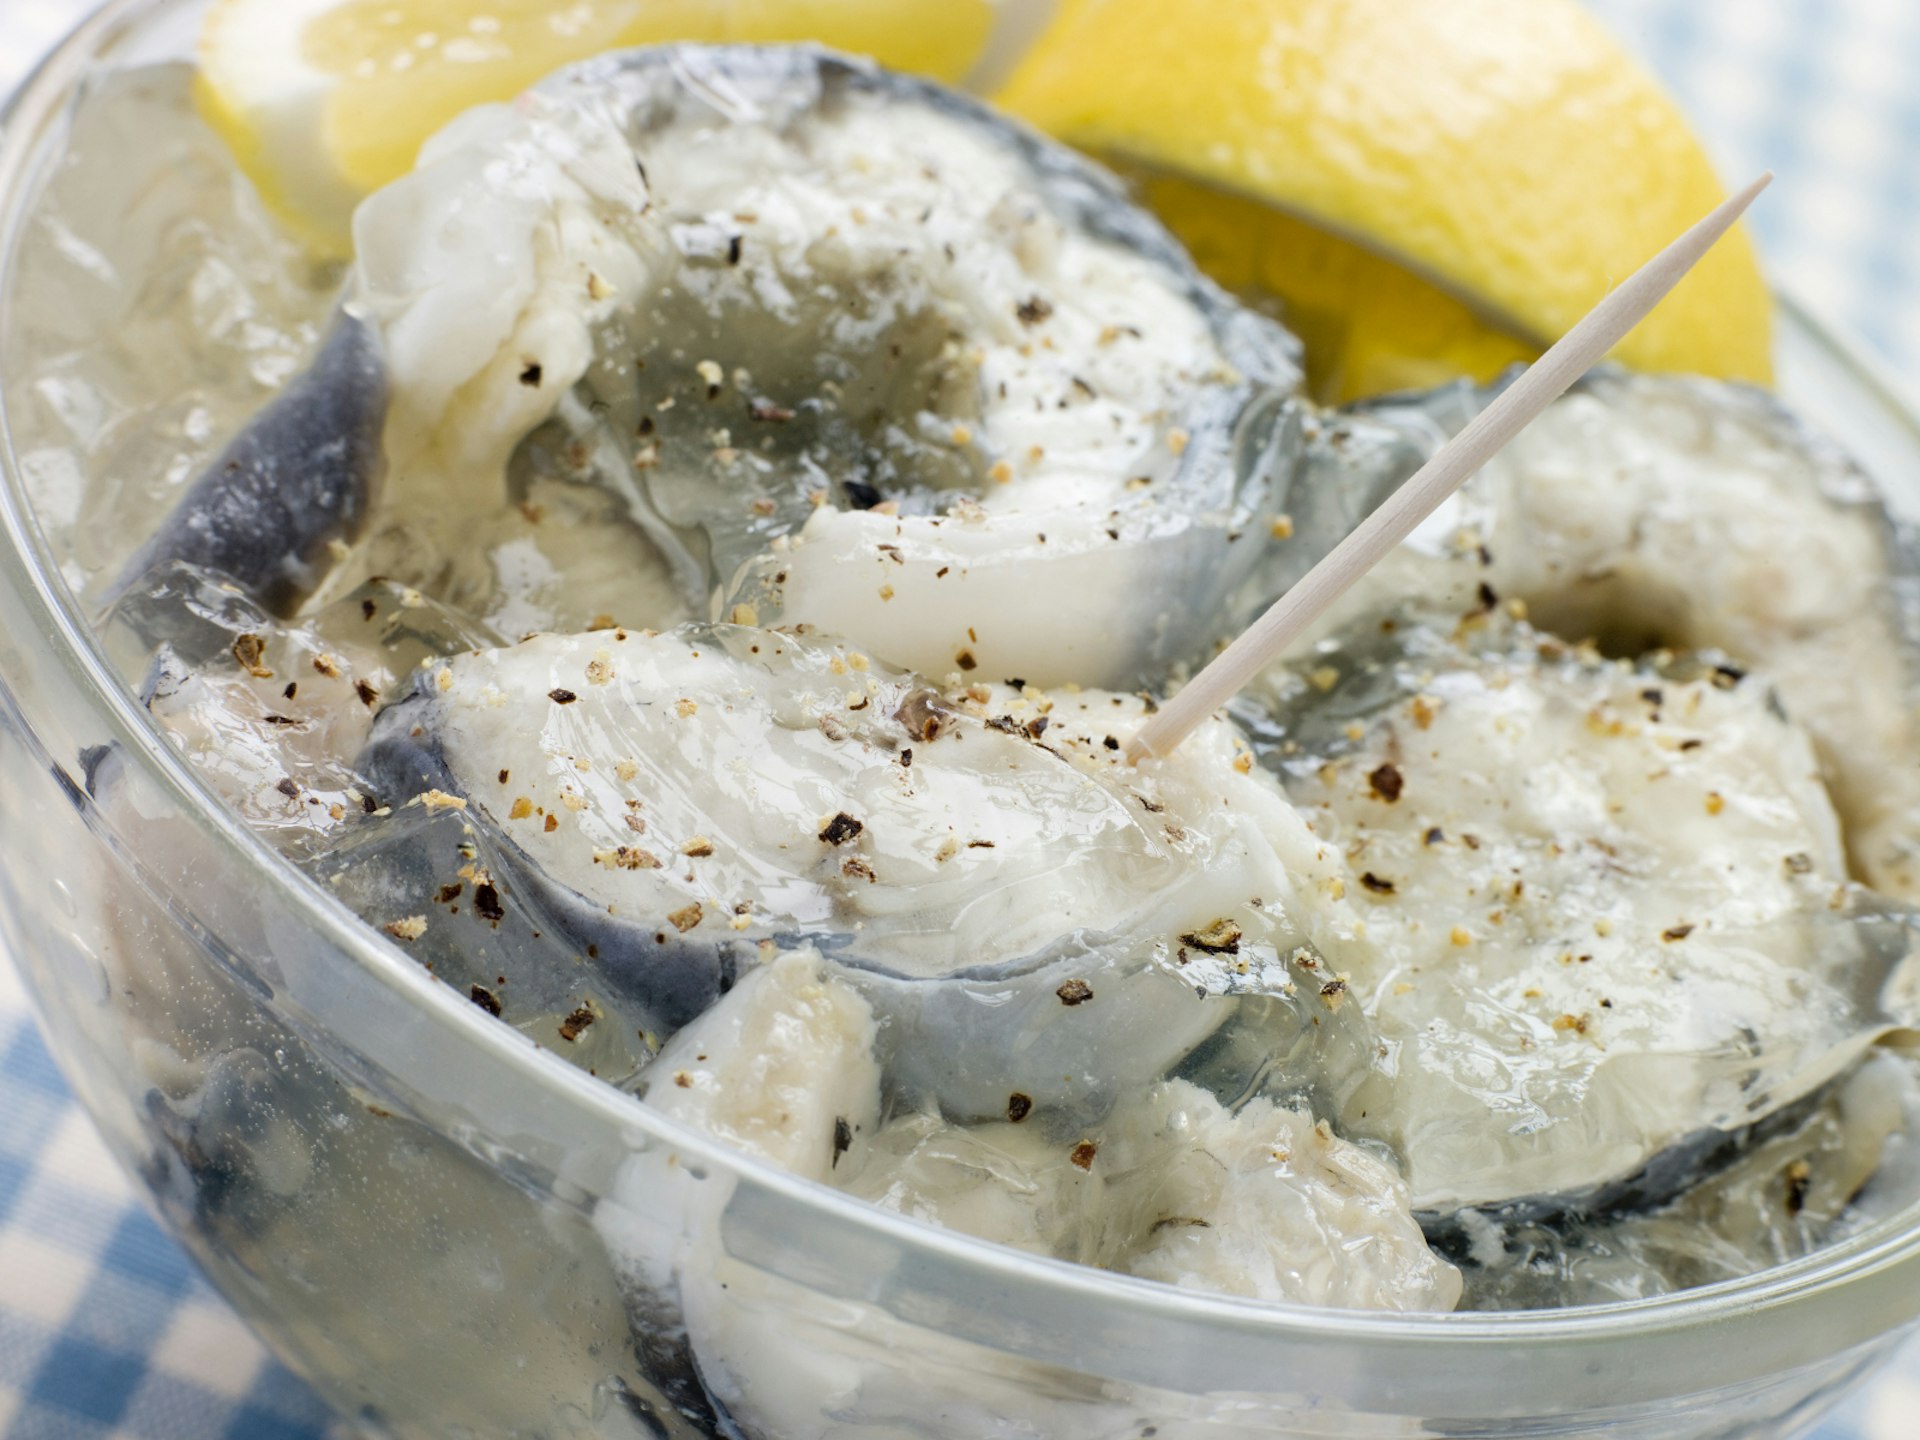 An up-close perspective of a bowl of jellied eels